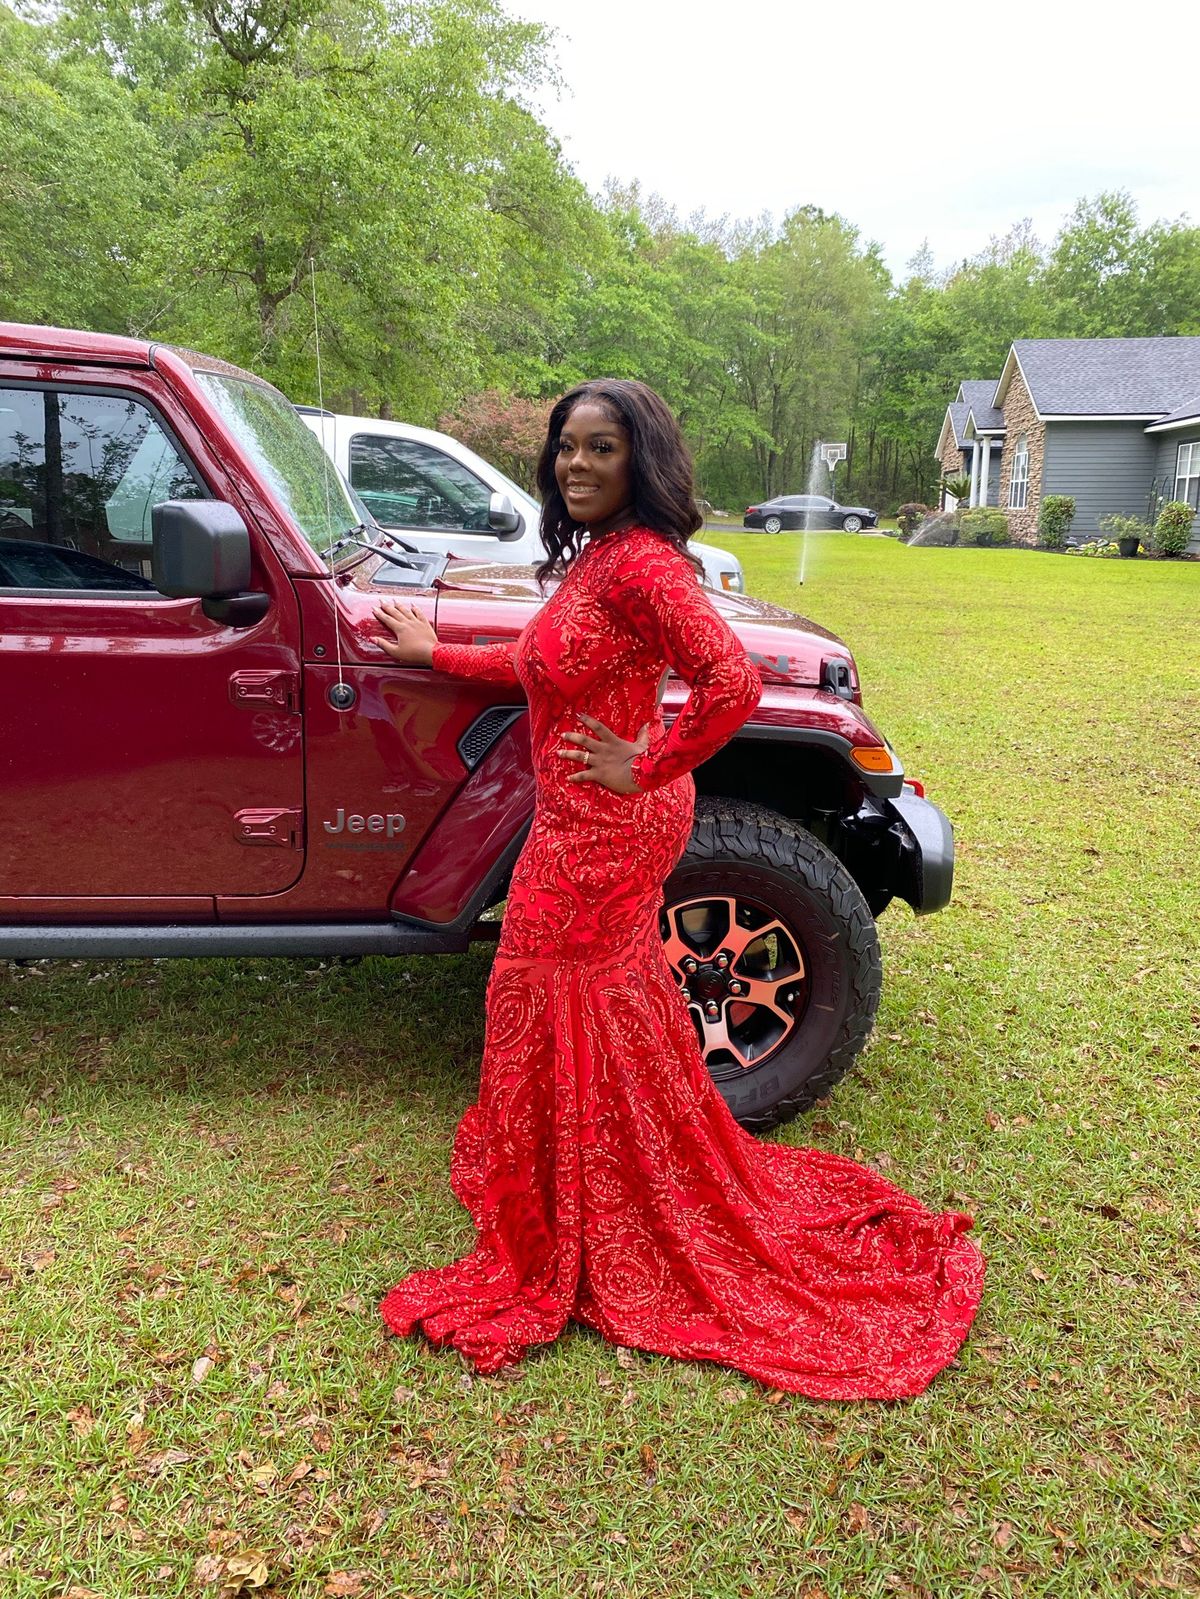 Size 14 Prom Red Dress With Train on Queenly